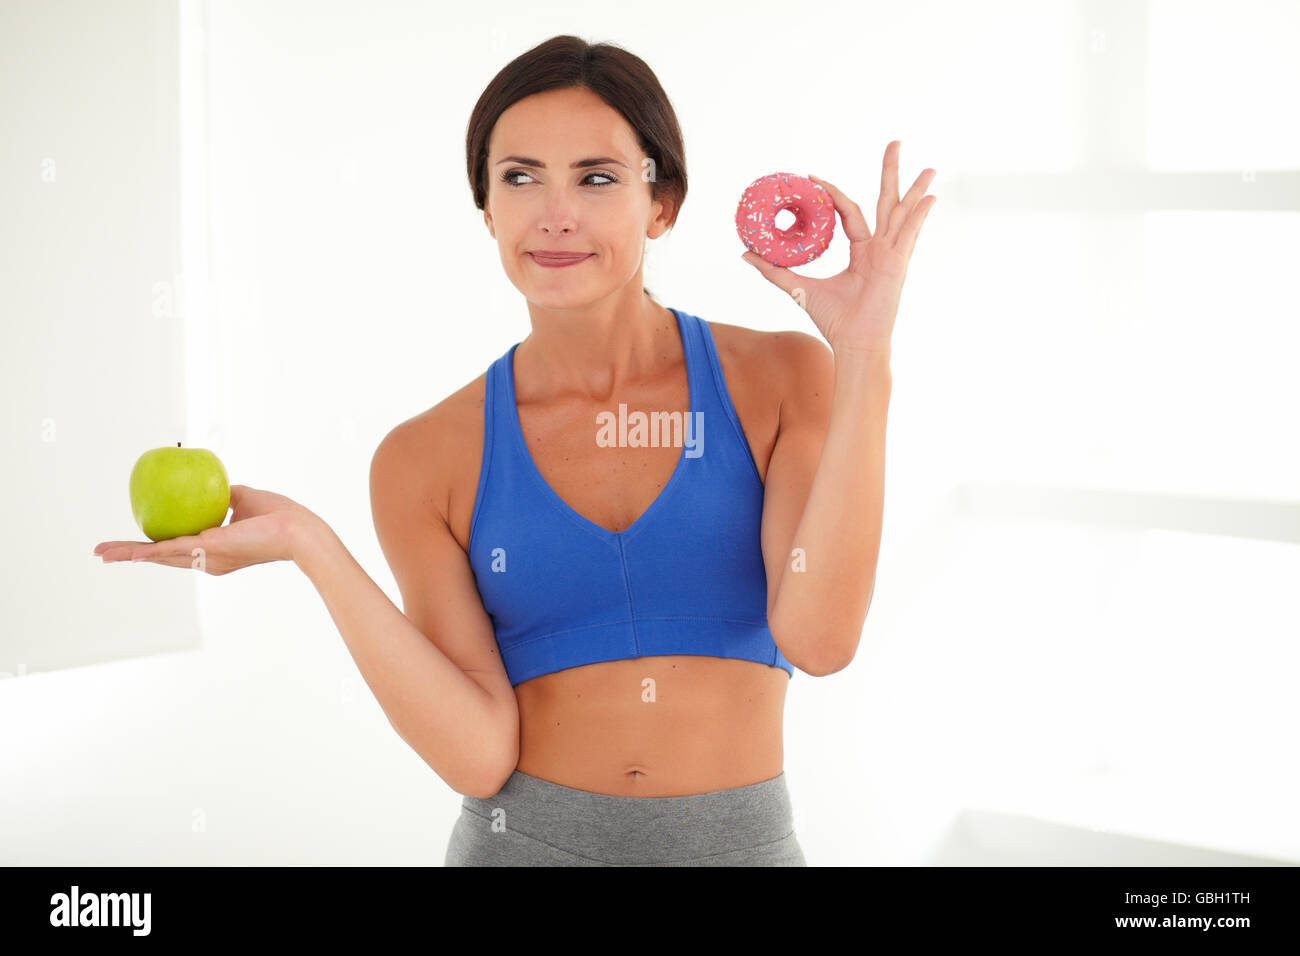 Female in training clothes holding sugary cake and fruit while is deciding Stock Photo